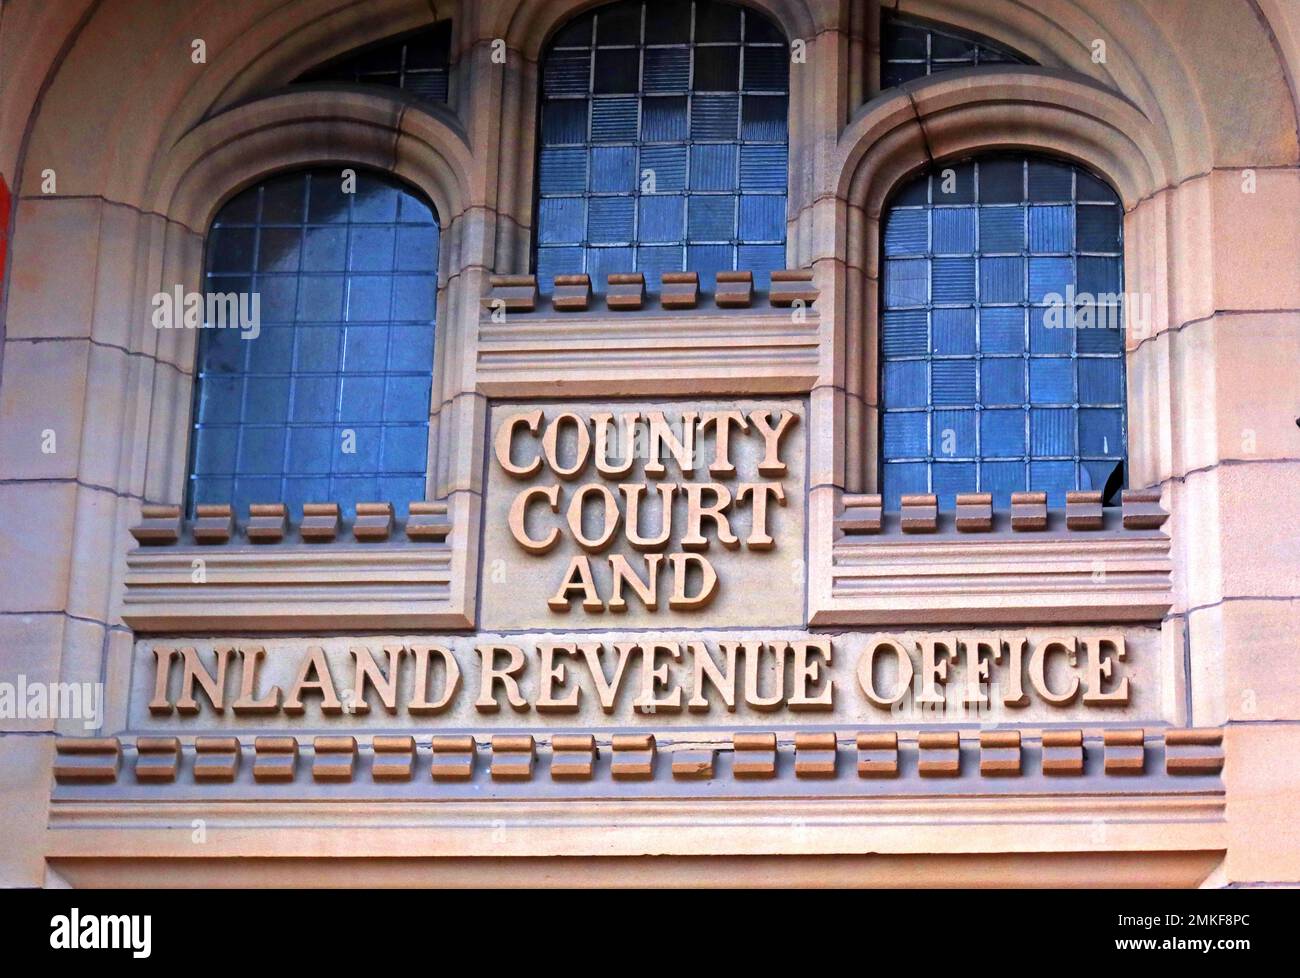 County Court and Inland Revenue Office 1887, The Old Courts, Crawford Street, Wigan, Lancashire, INGHILTERRA, REGNO UNITO, WN1 1NA Foto Stock